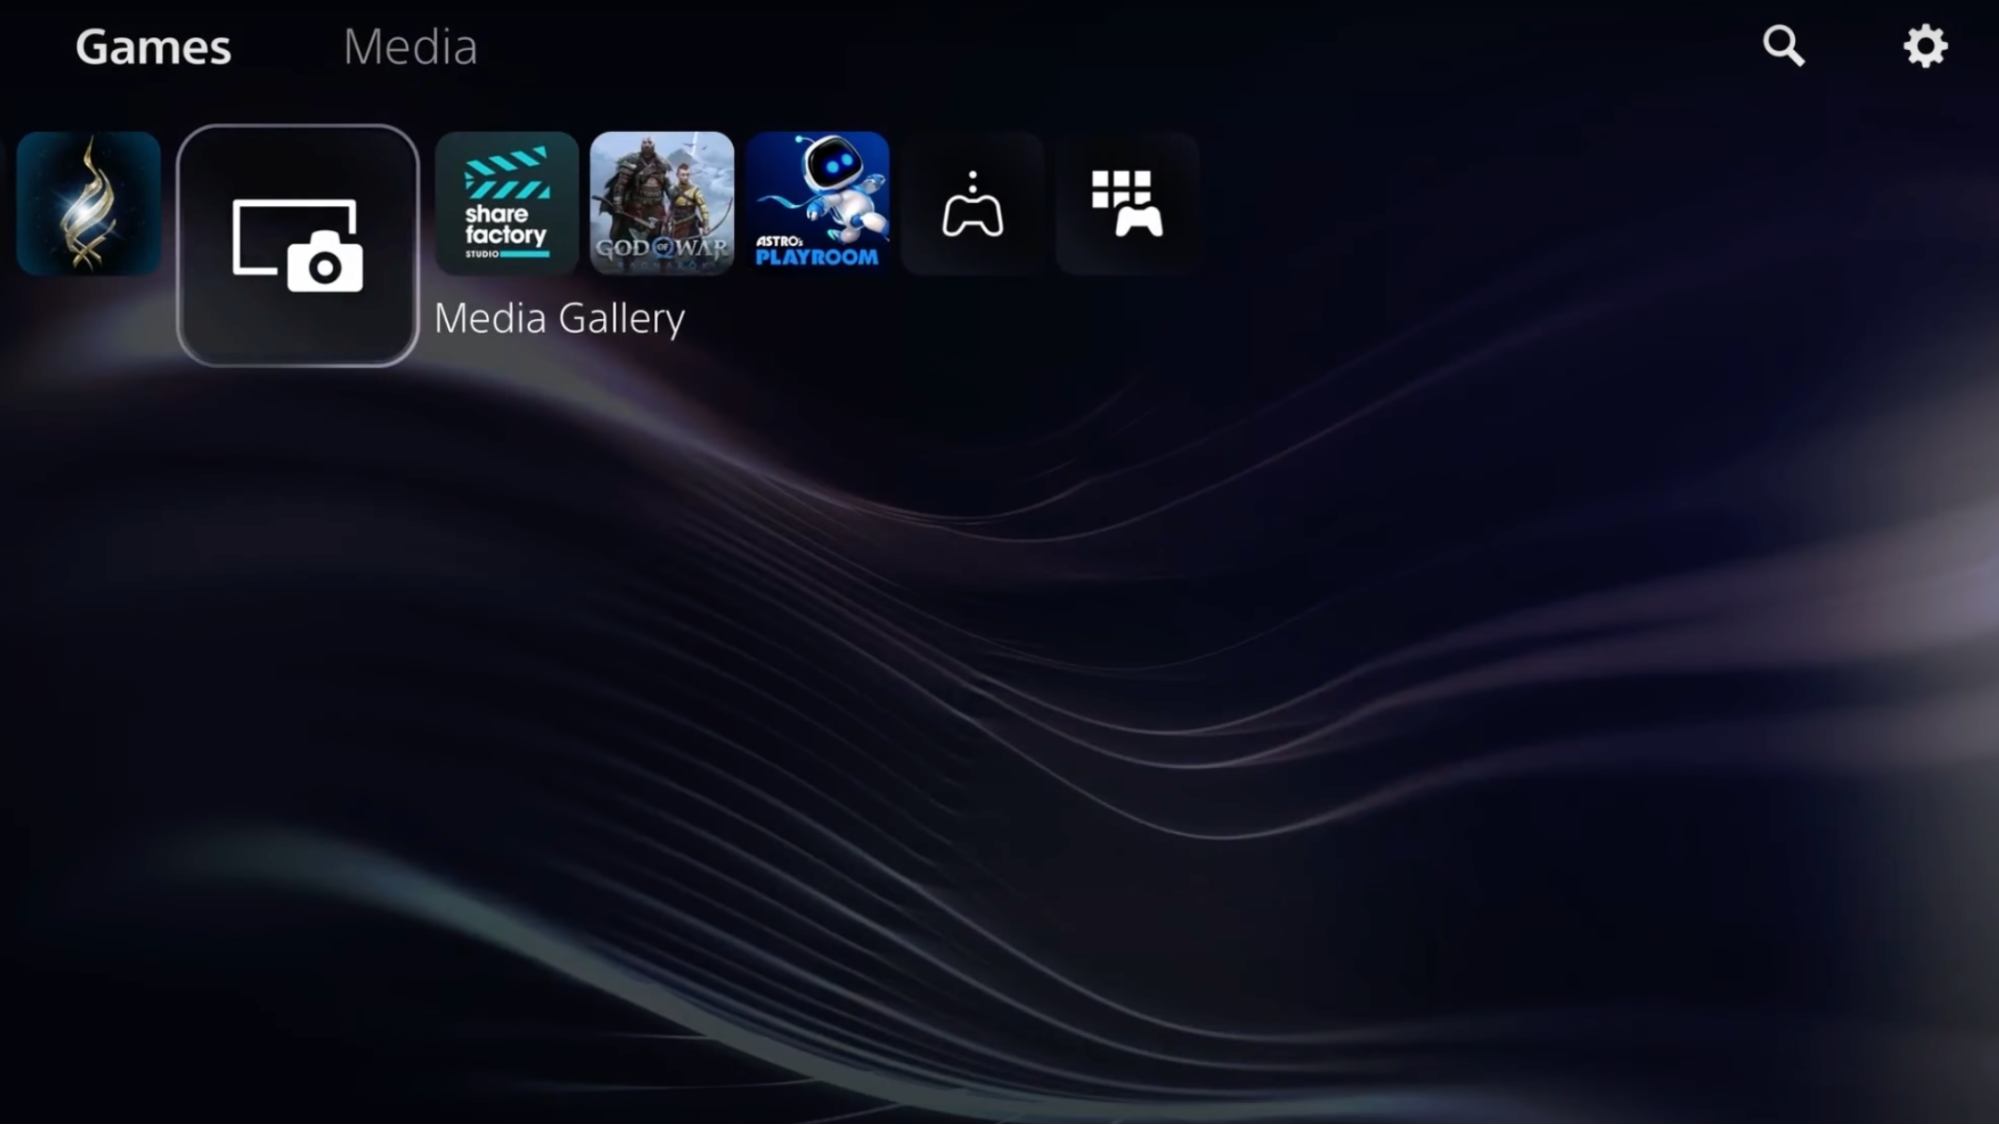 select the Media gallery icon